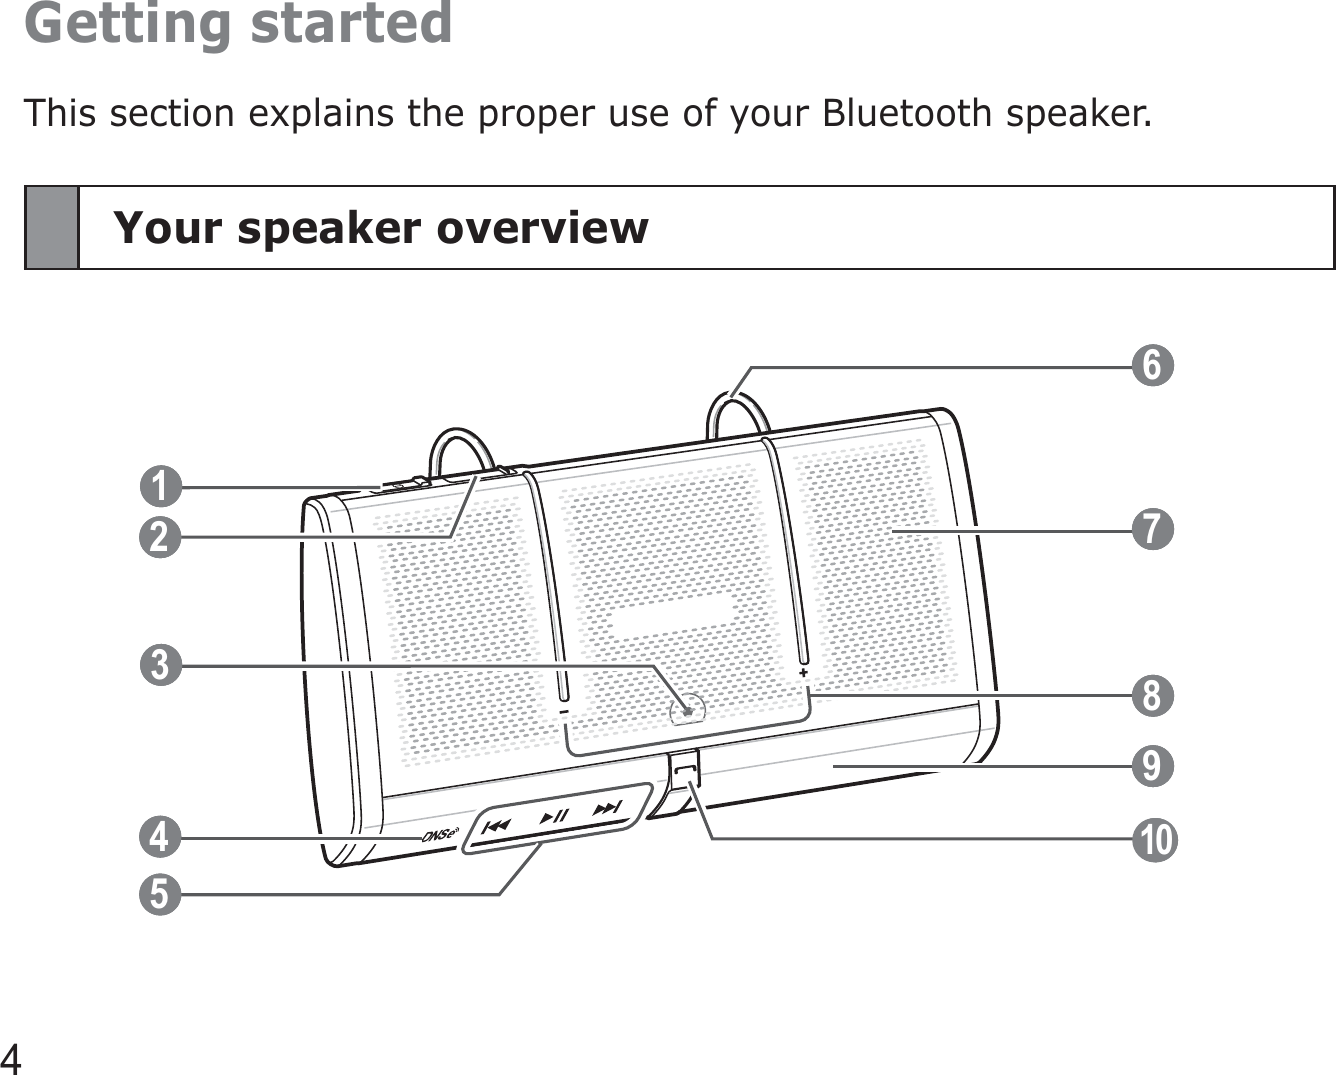 4Getting startedThis section explains the proper use of your Bluetooth speaker.Your speaker overview 2  4  5  7  1  9  10  6  3   8 